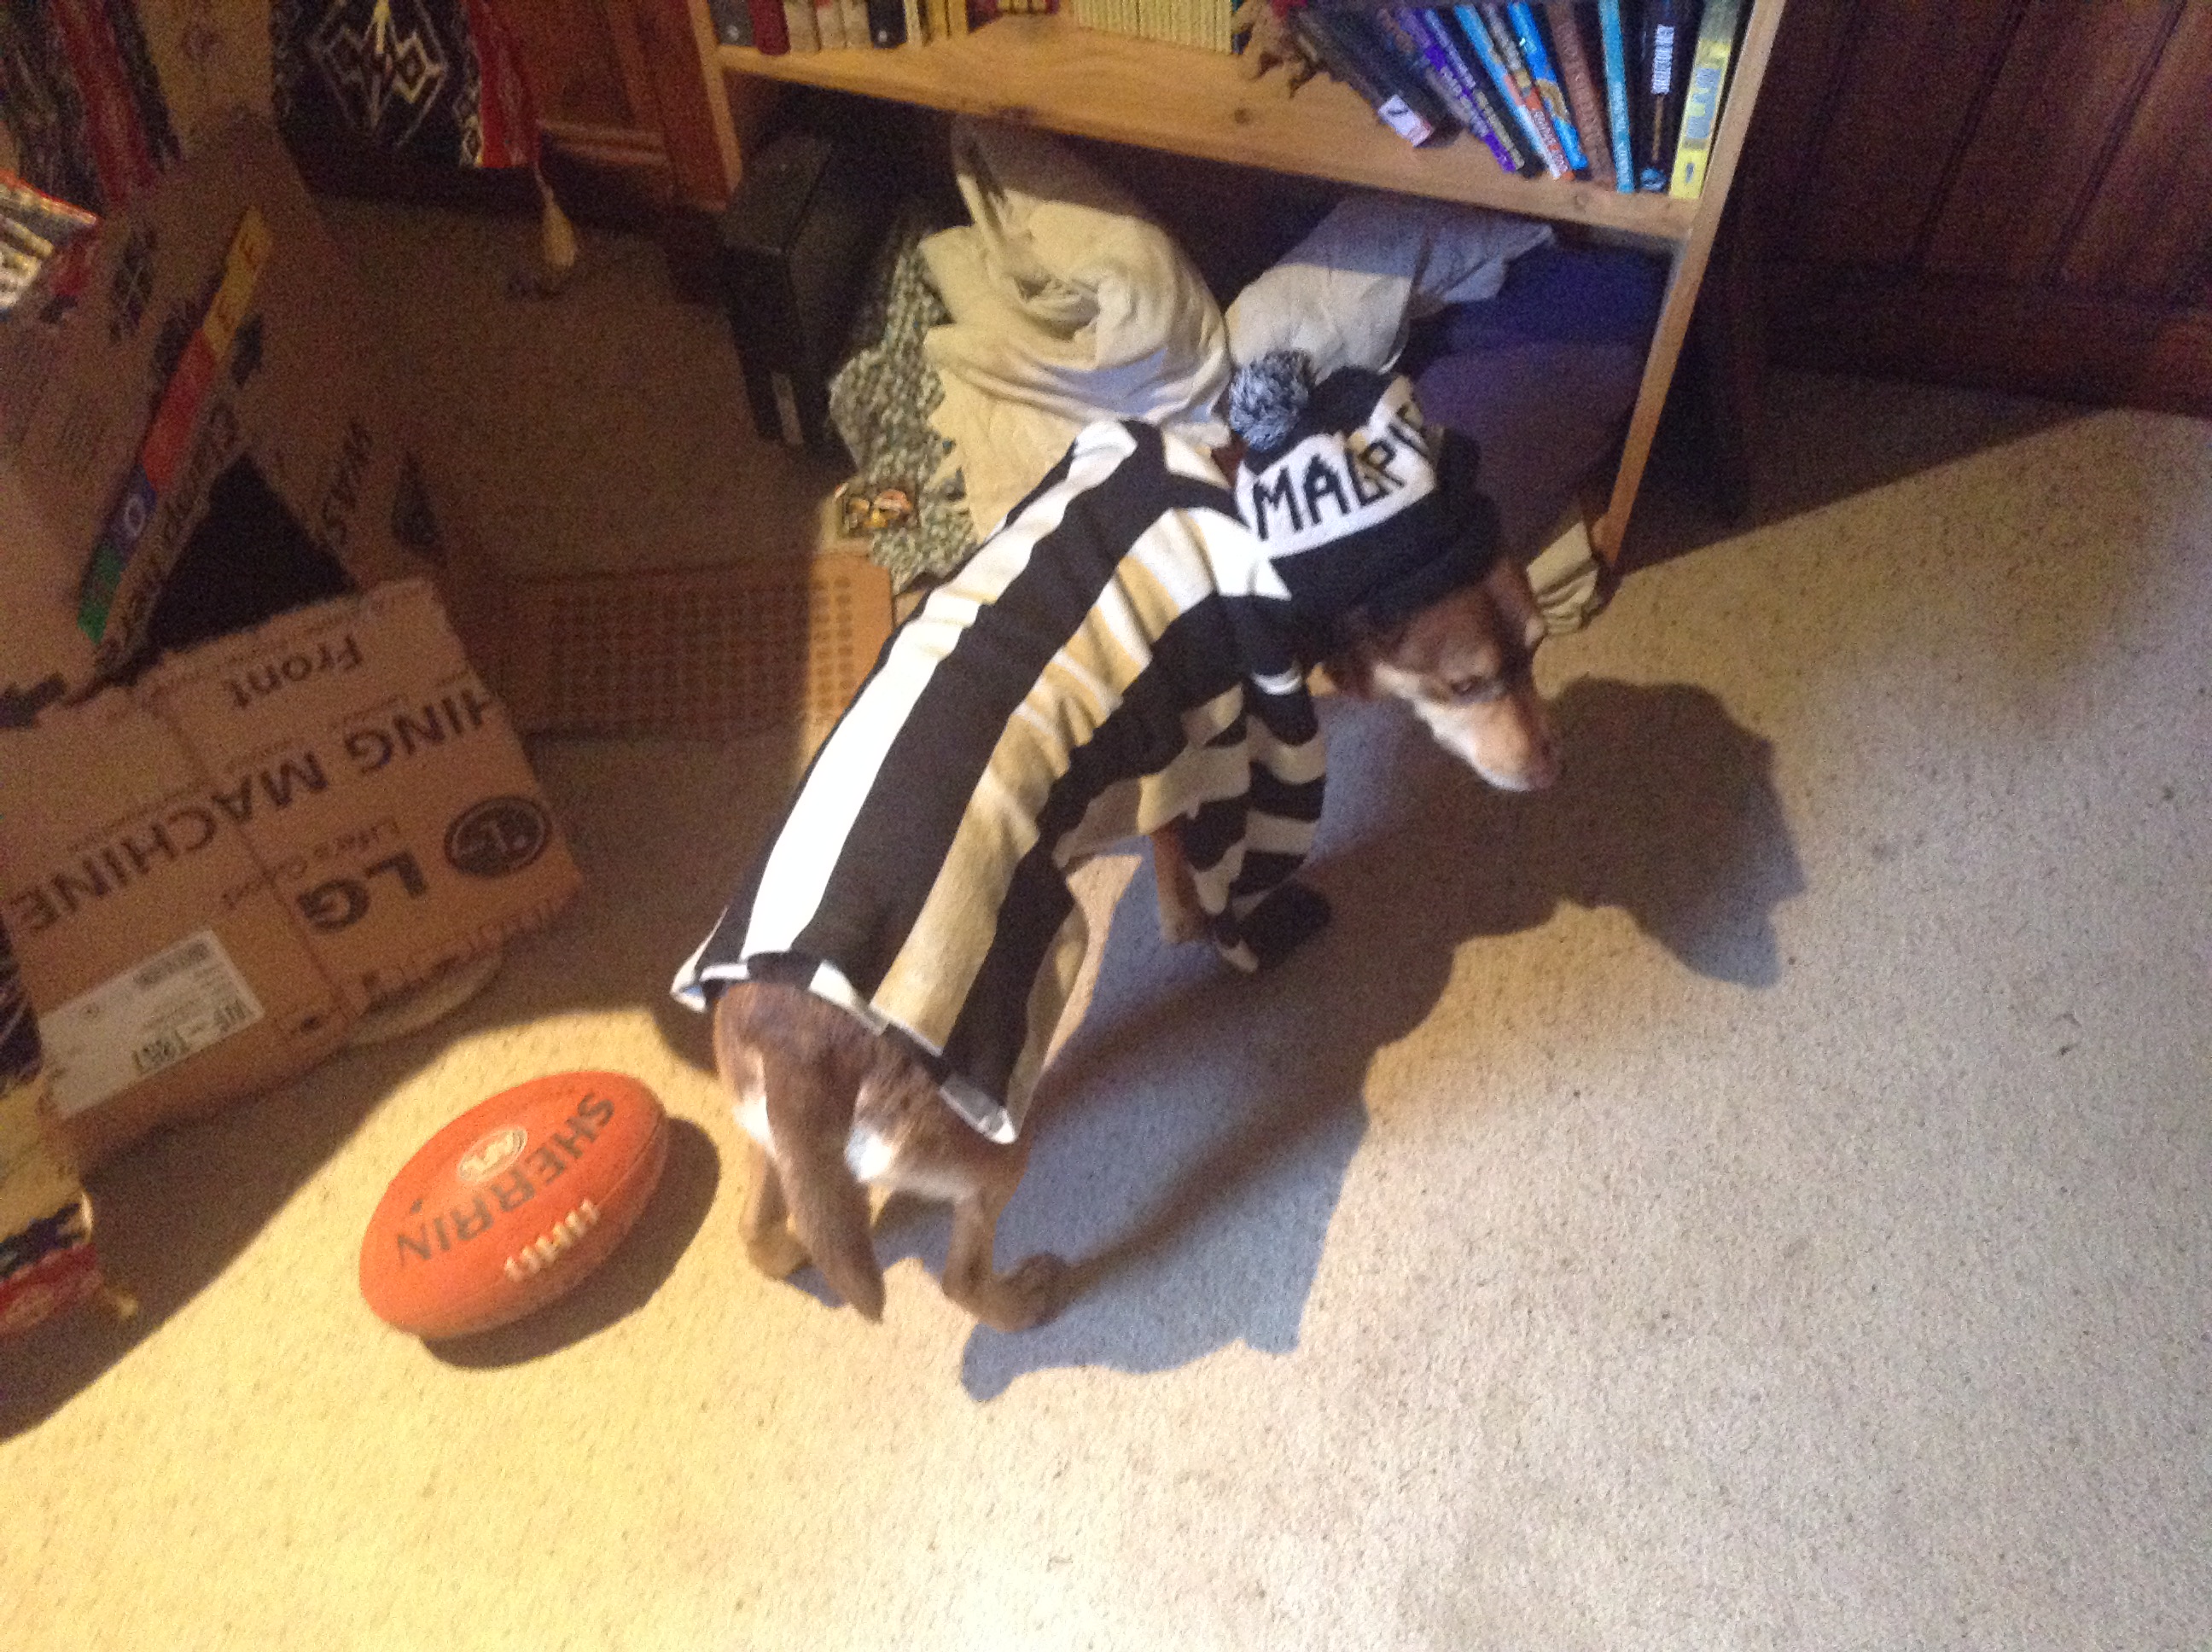 My dogs Collingwood addiction keeps getting bigger!